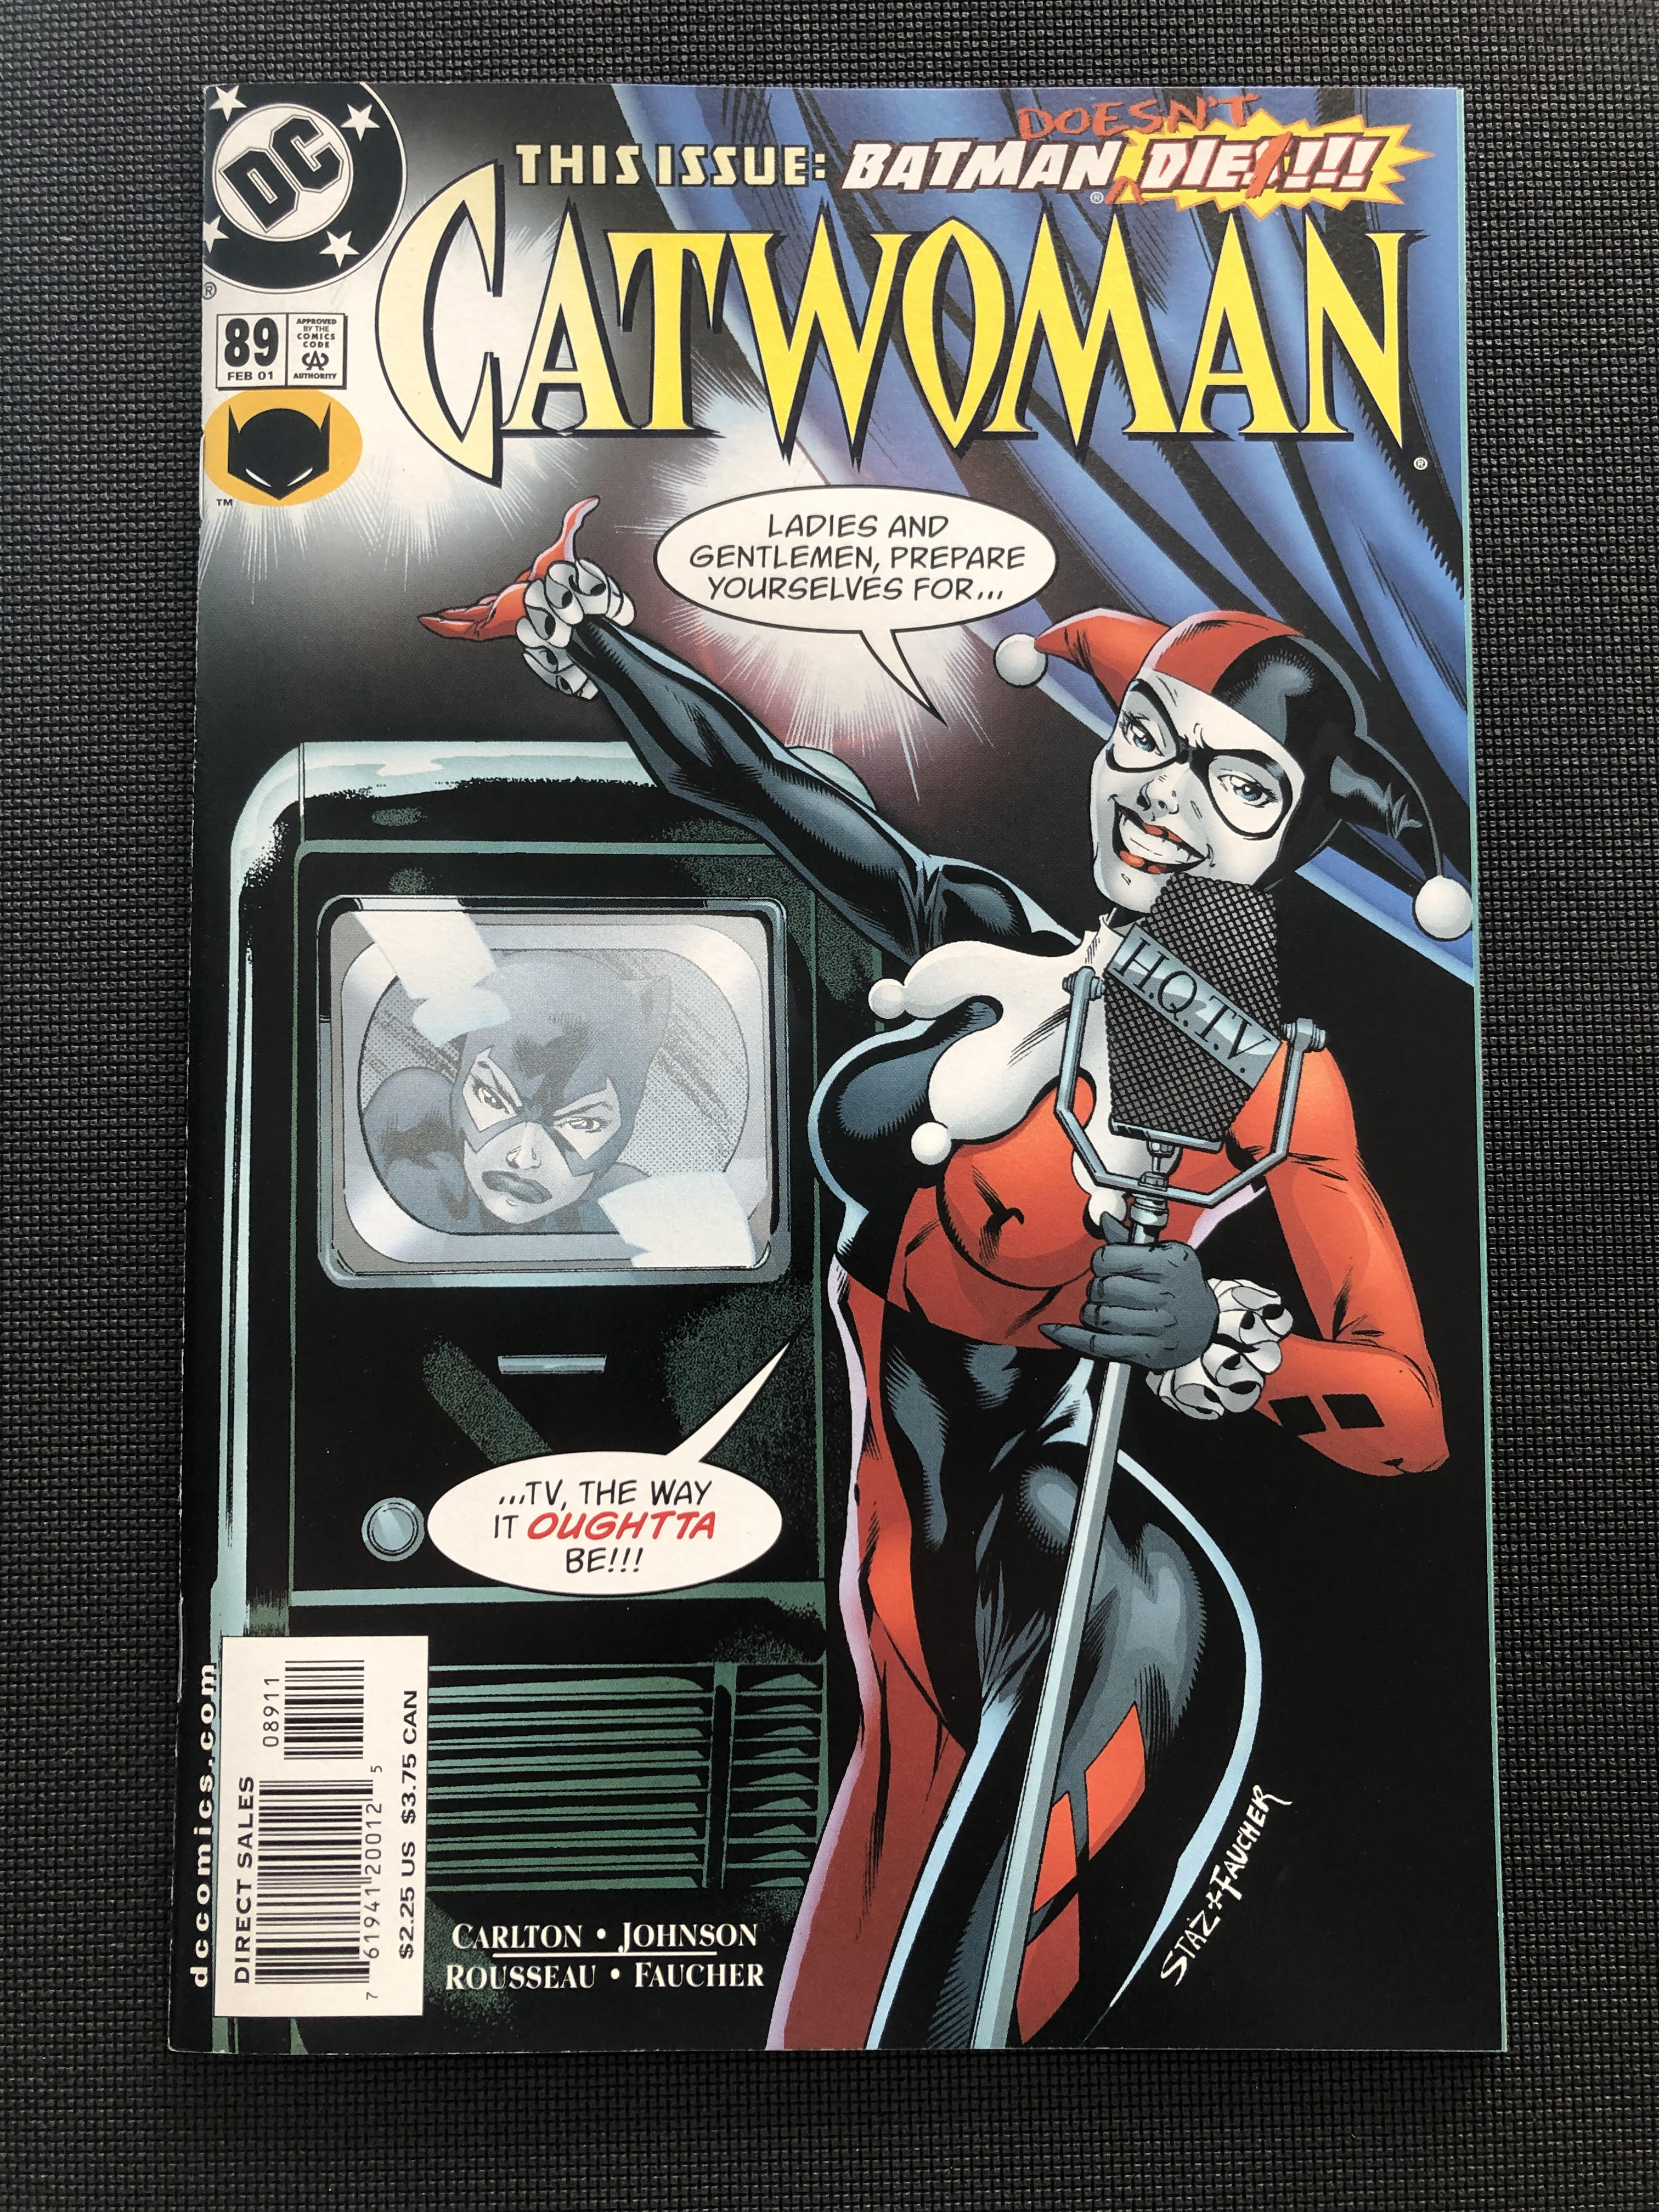 Catwoman #89 (1993 Series)